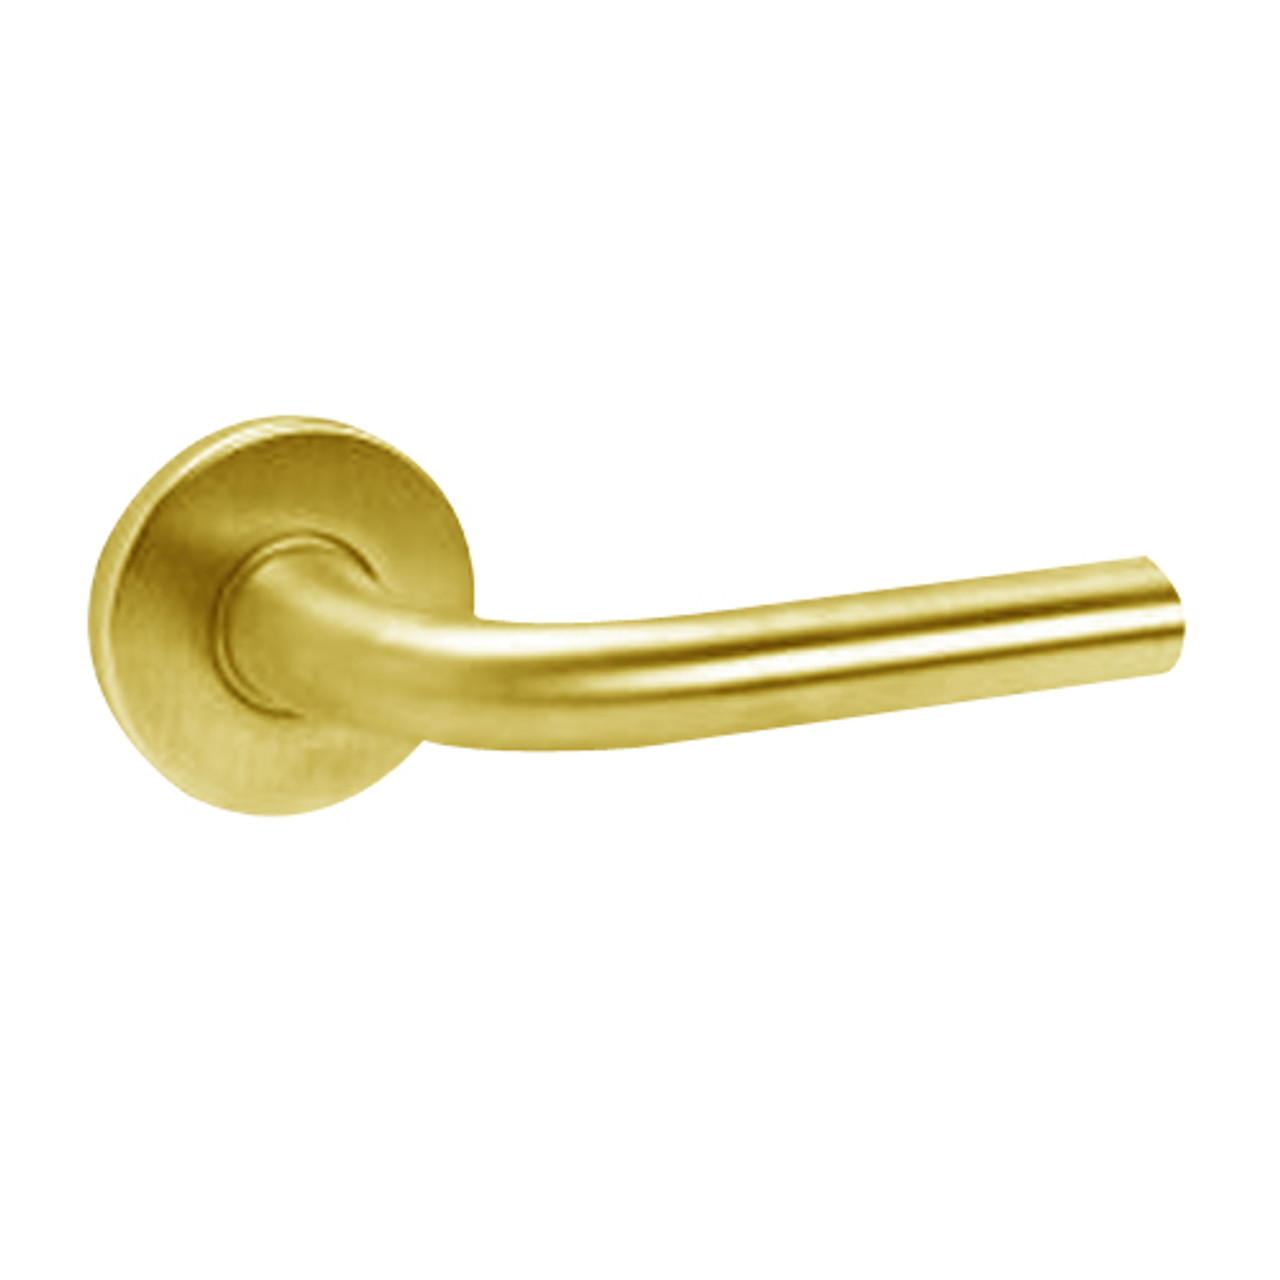 ML2042-RWB-605-CL6 Corbin Russwin ML2000 Series IC 6-Pin Less Core Mortise Entrance Locksets with Regis Lever in Bright Brass